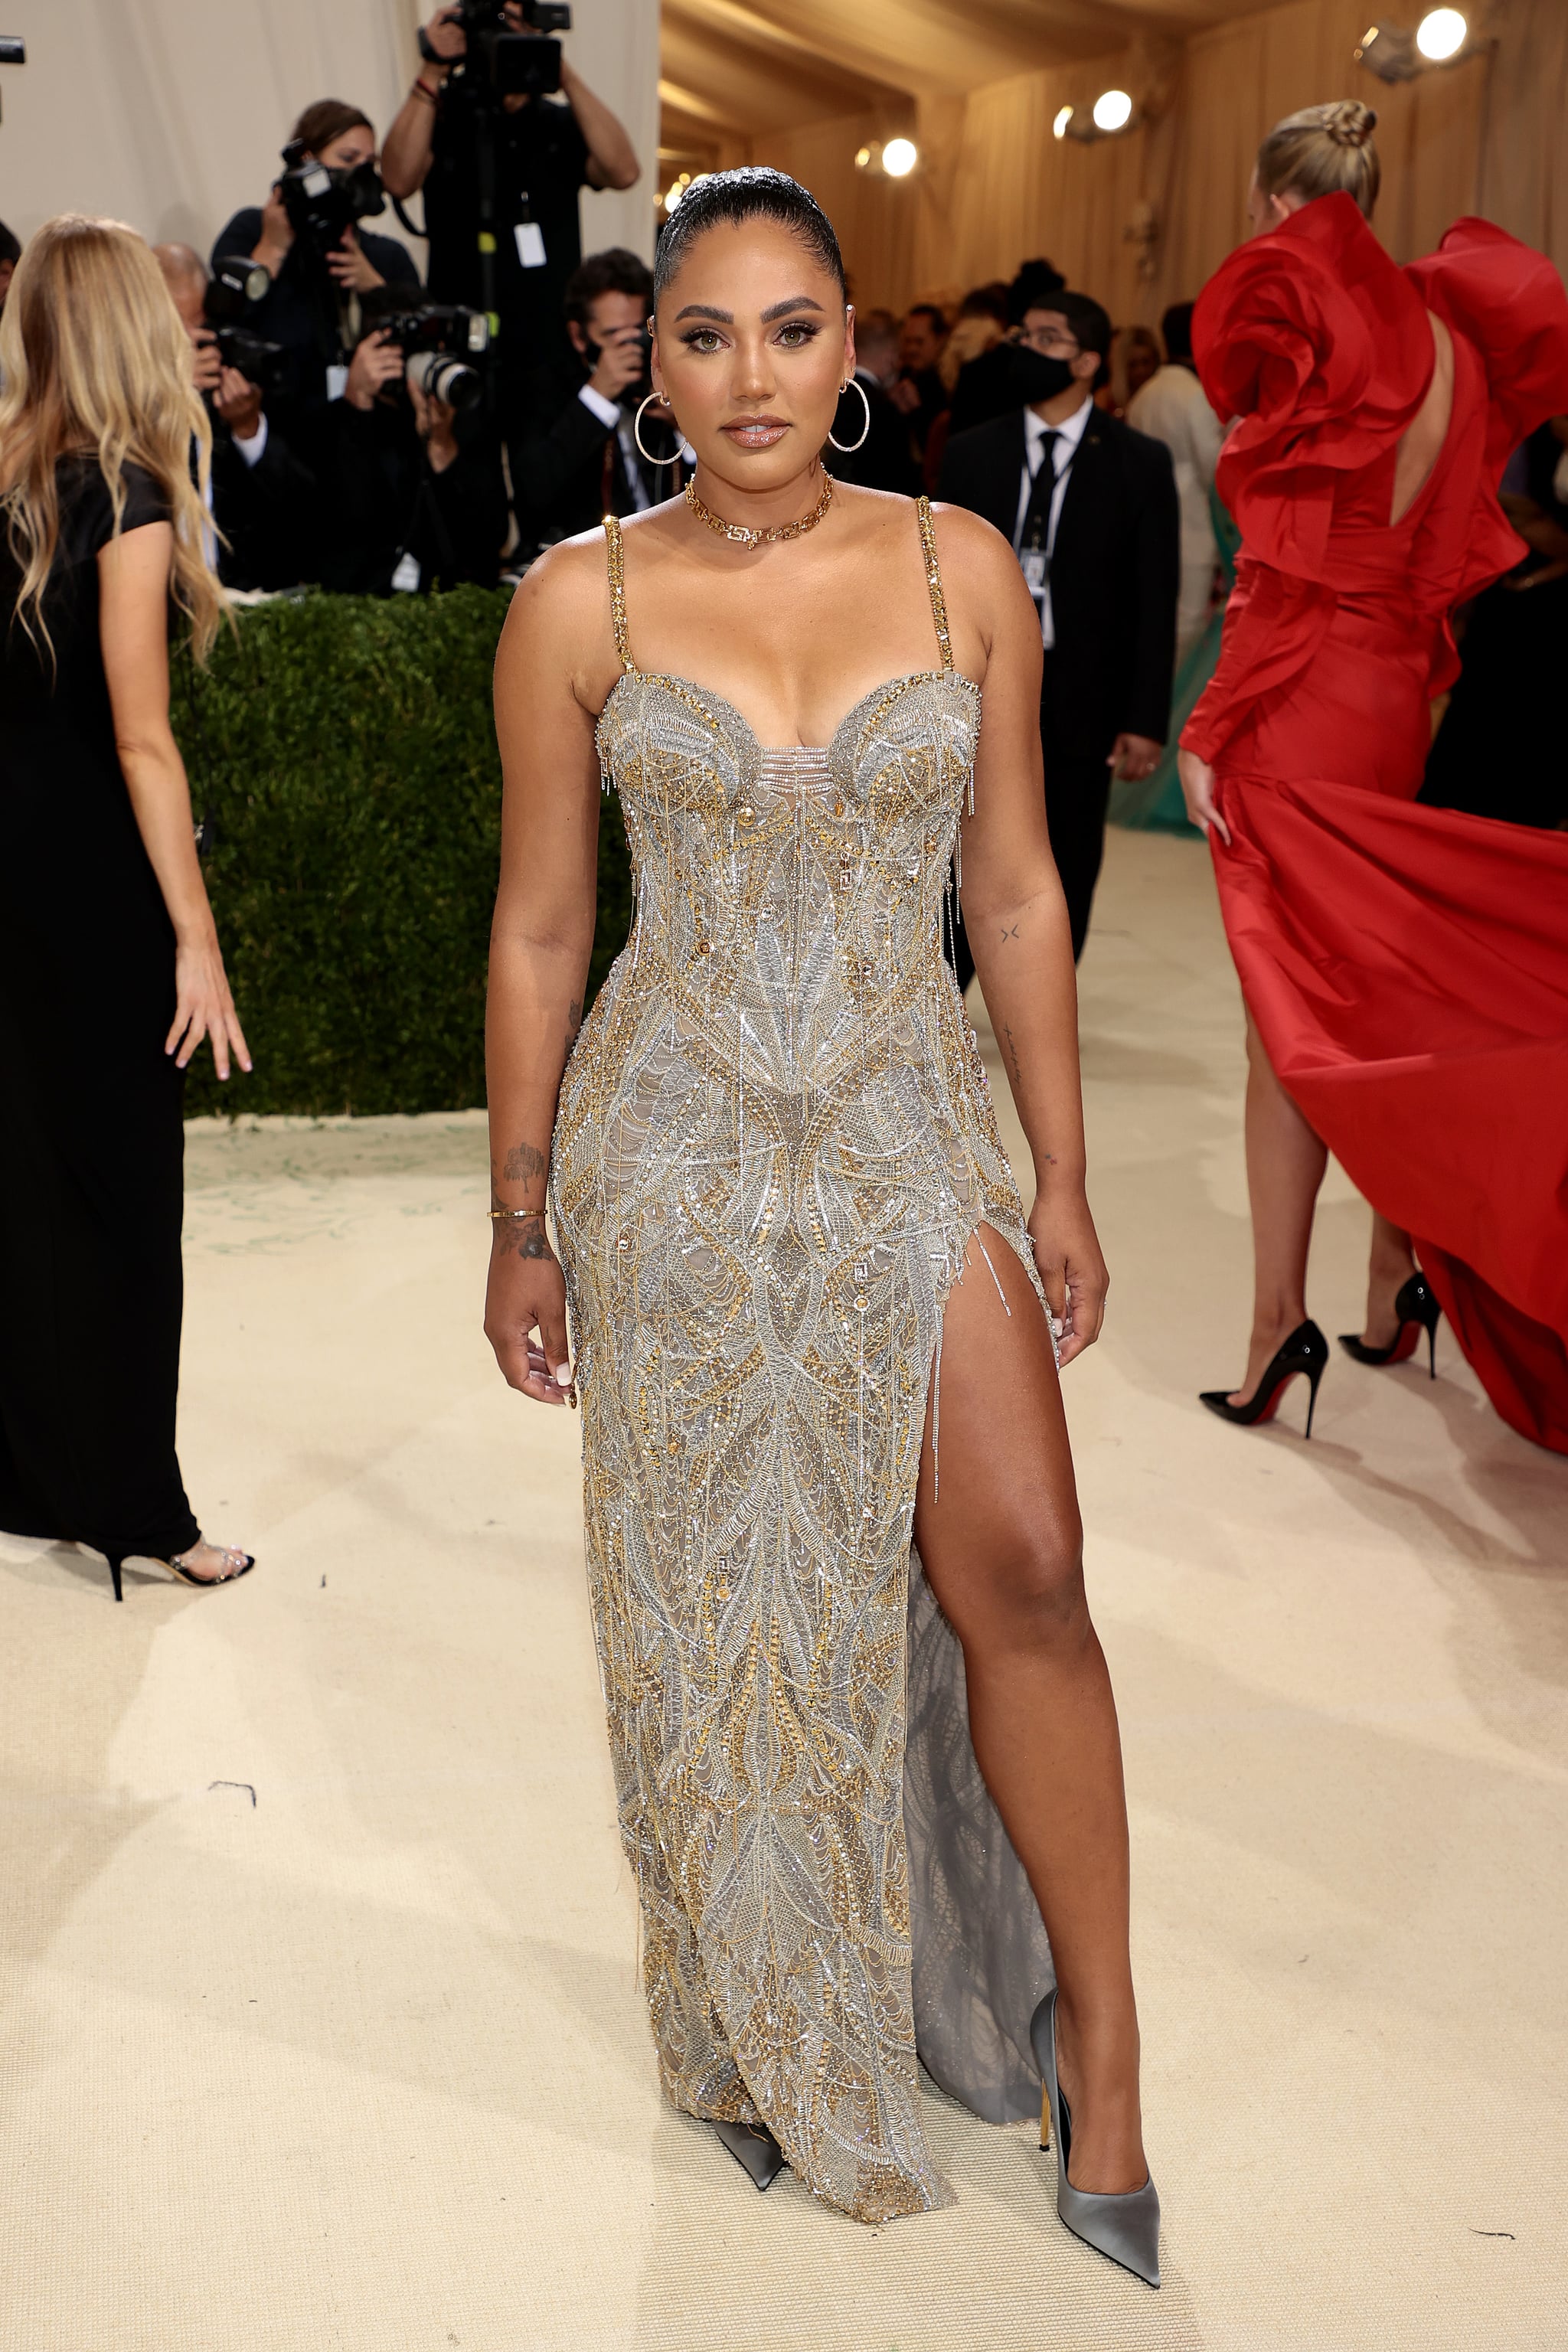 NEW YORK, NEW YORK - SEPTEMBER 13: Ayesha Curry attends the The 2021 Met Gala Celebrating In America: A Lexicon Of Fashion at Metropolitan Museum of Art on September 13, 2021 in New York City. (Photo by Dimitrios Kambouris/Getty Images for The Met Museum/Vogue )